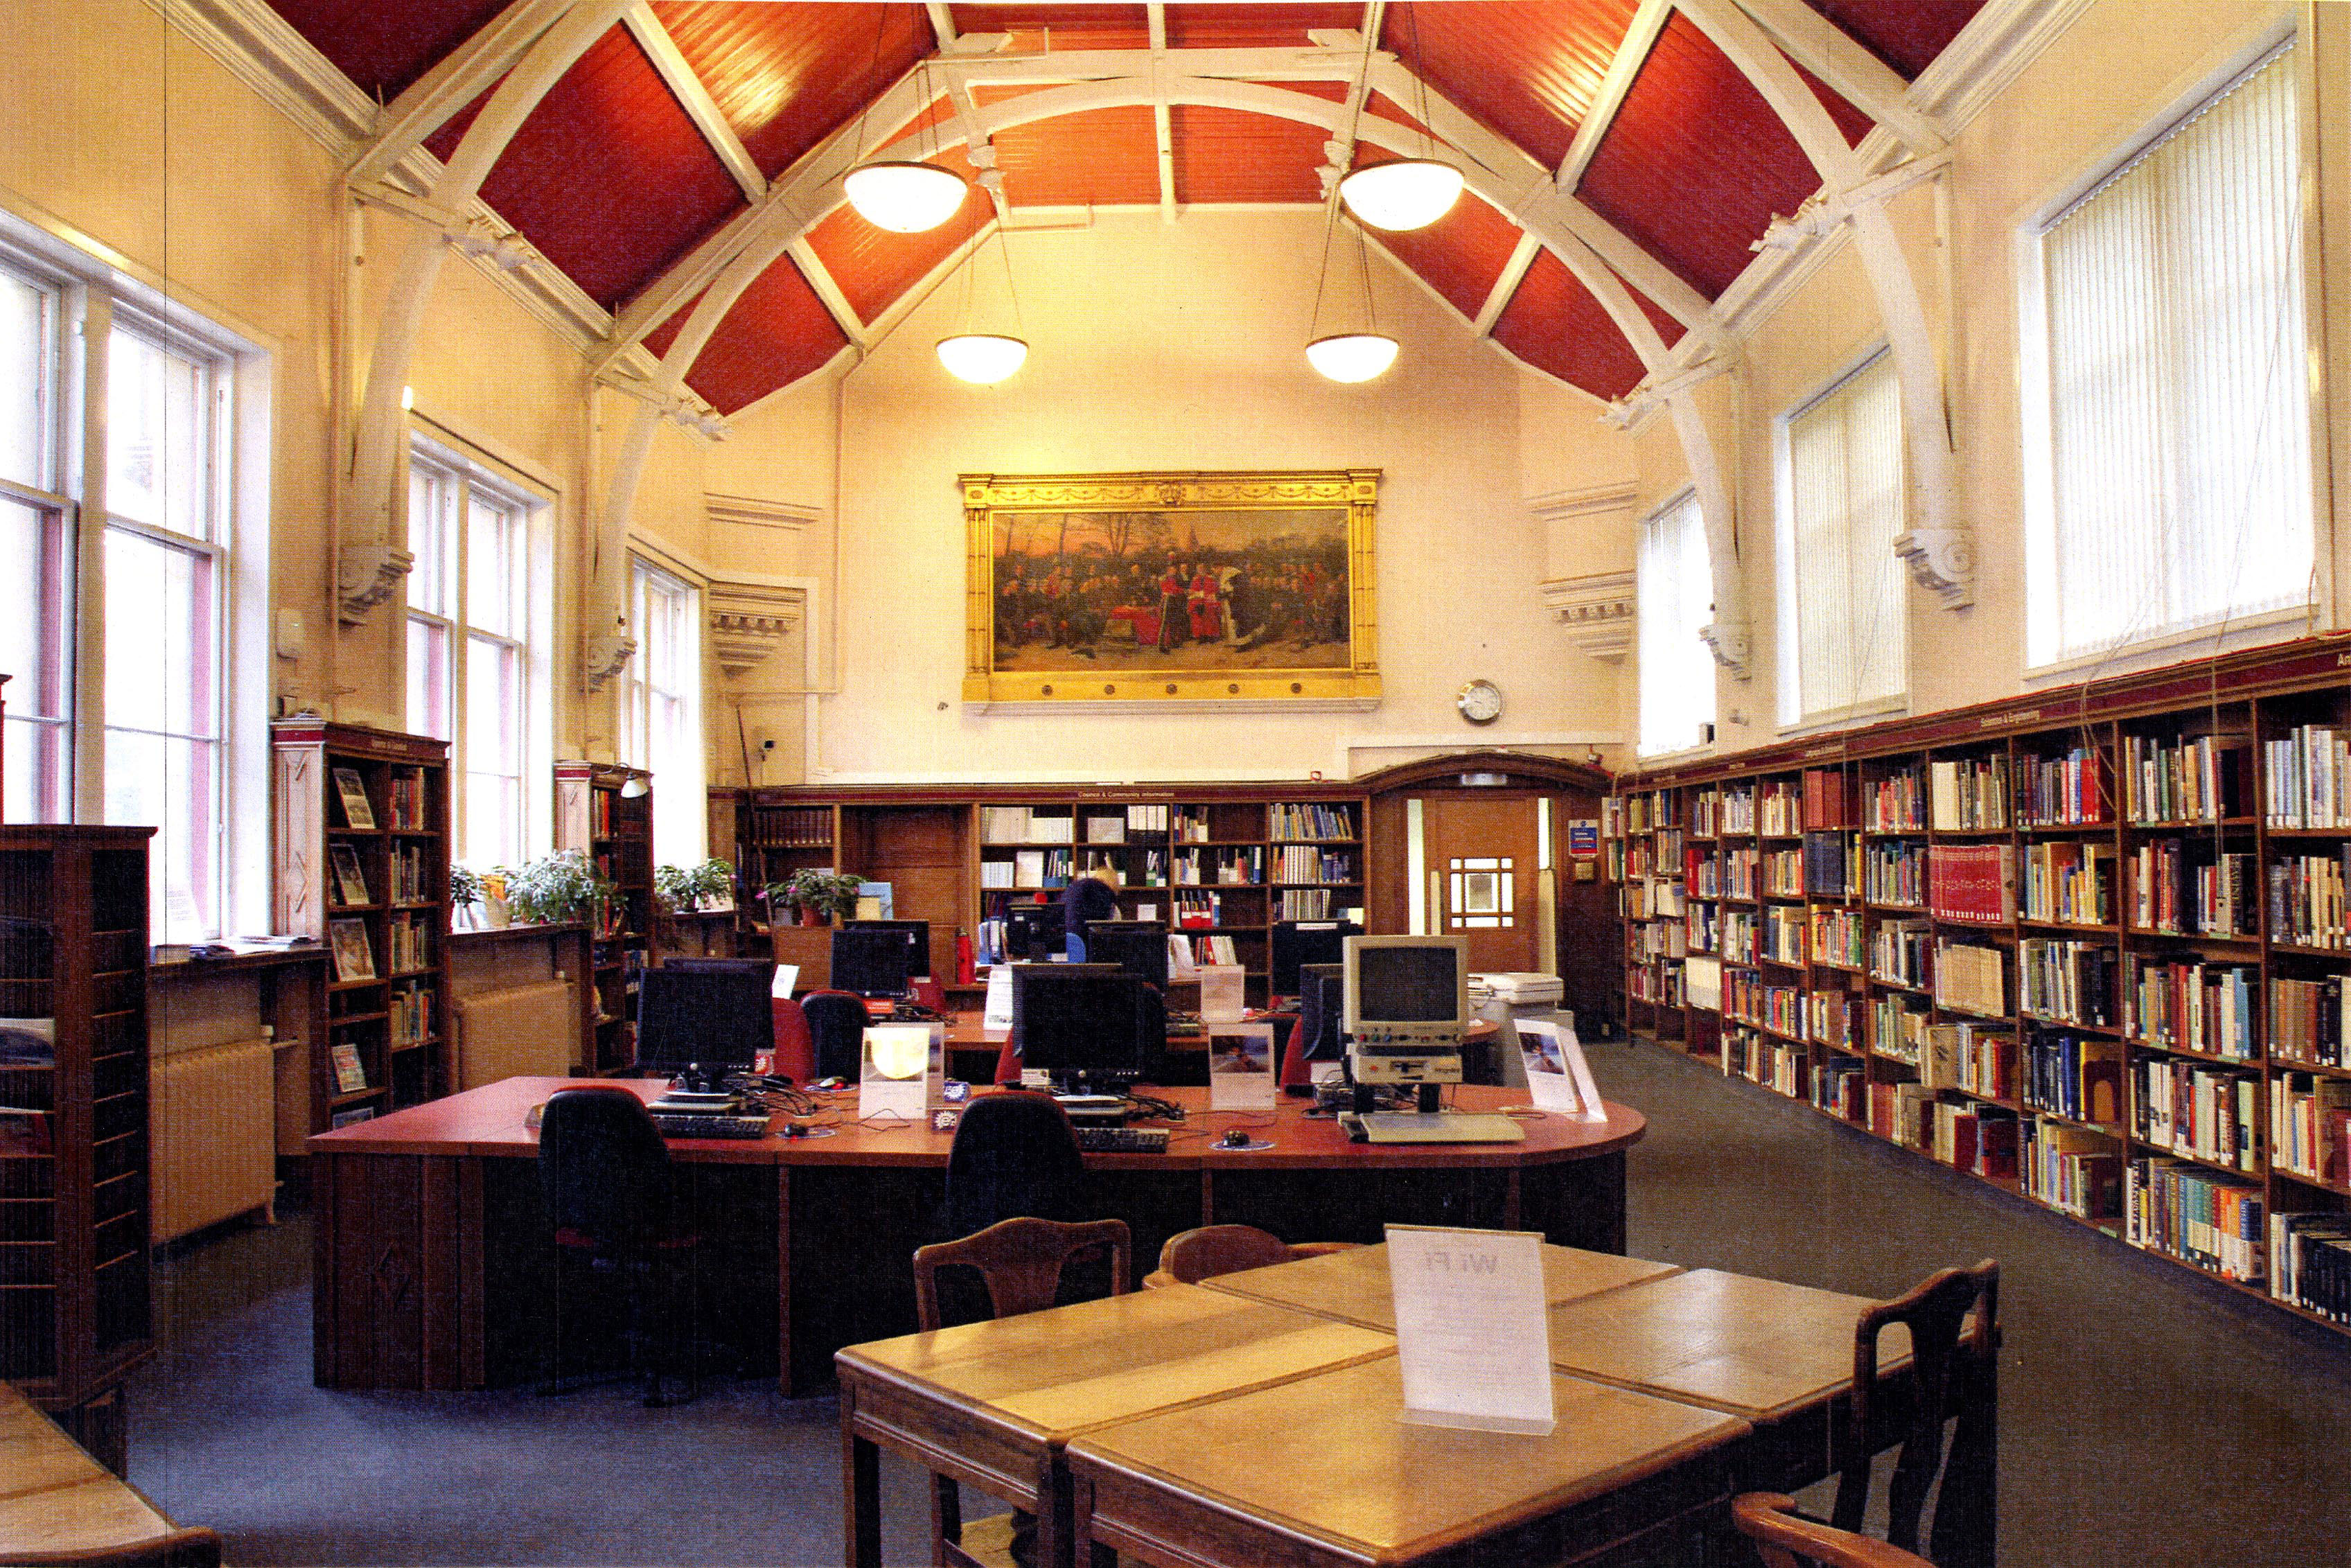 The reference department in the Carnegie Library in Dunfermline, Scotland, is both functional and beautiful.